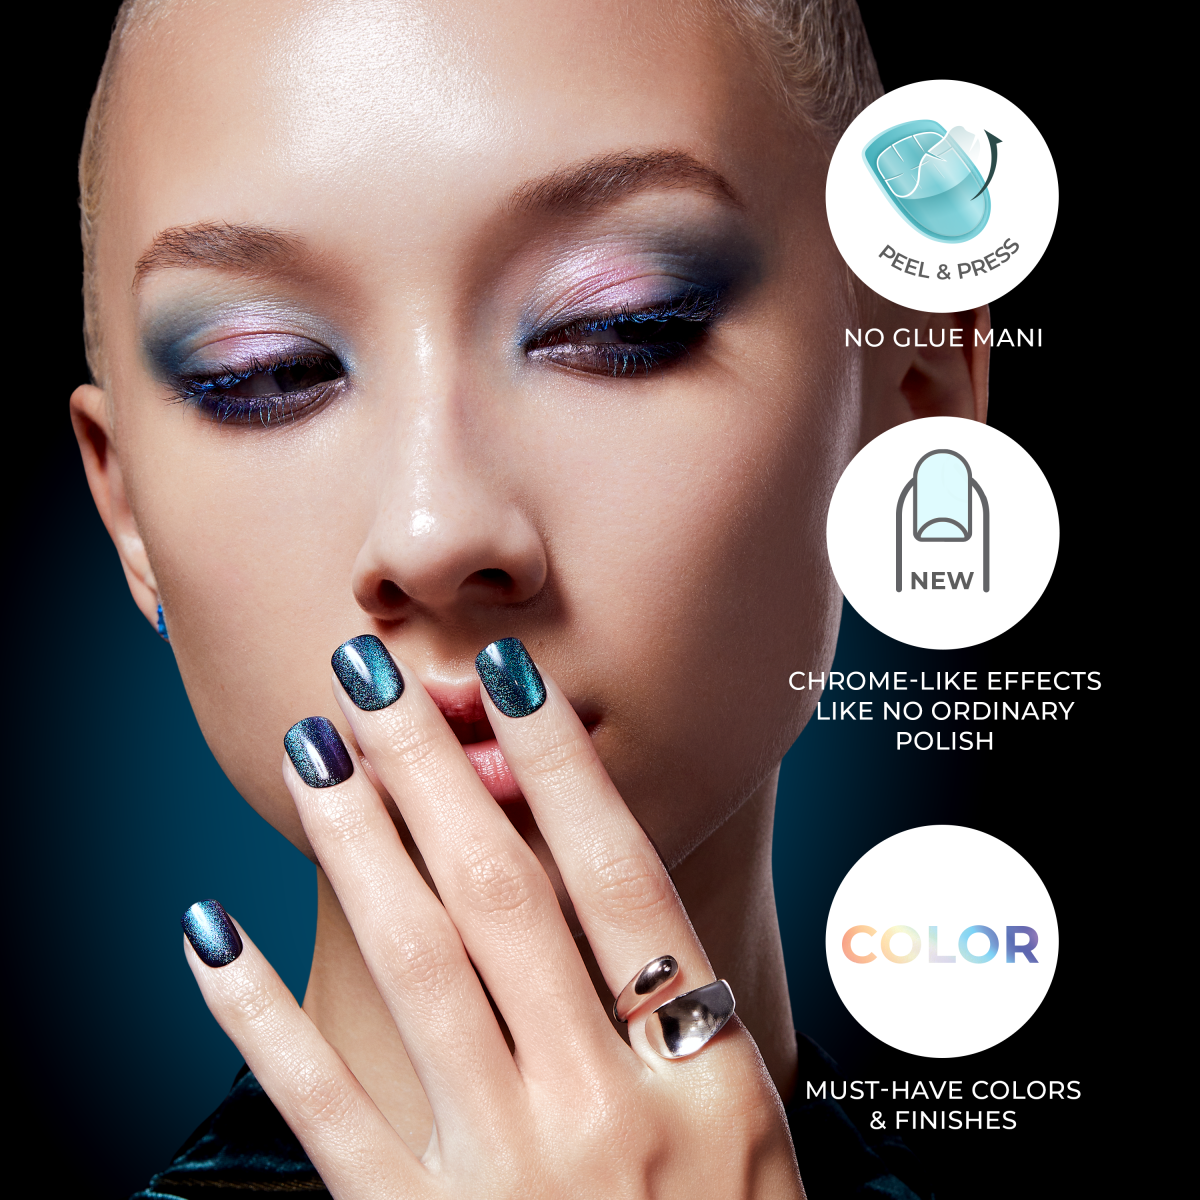 colorFX by imPRESS  Press-On Nails - The Good Days